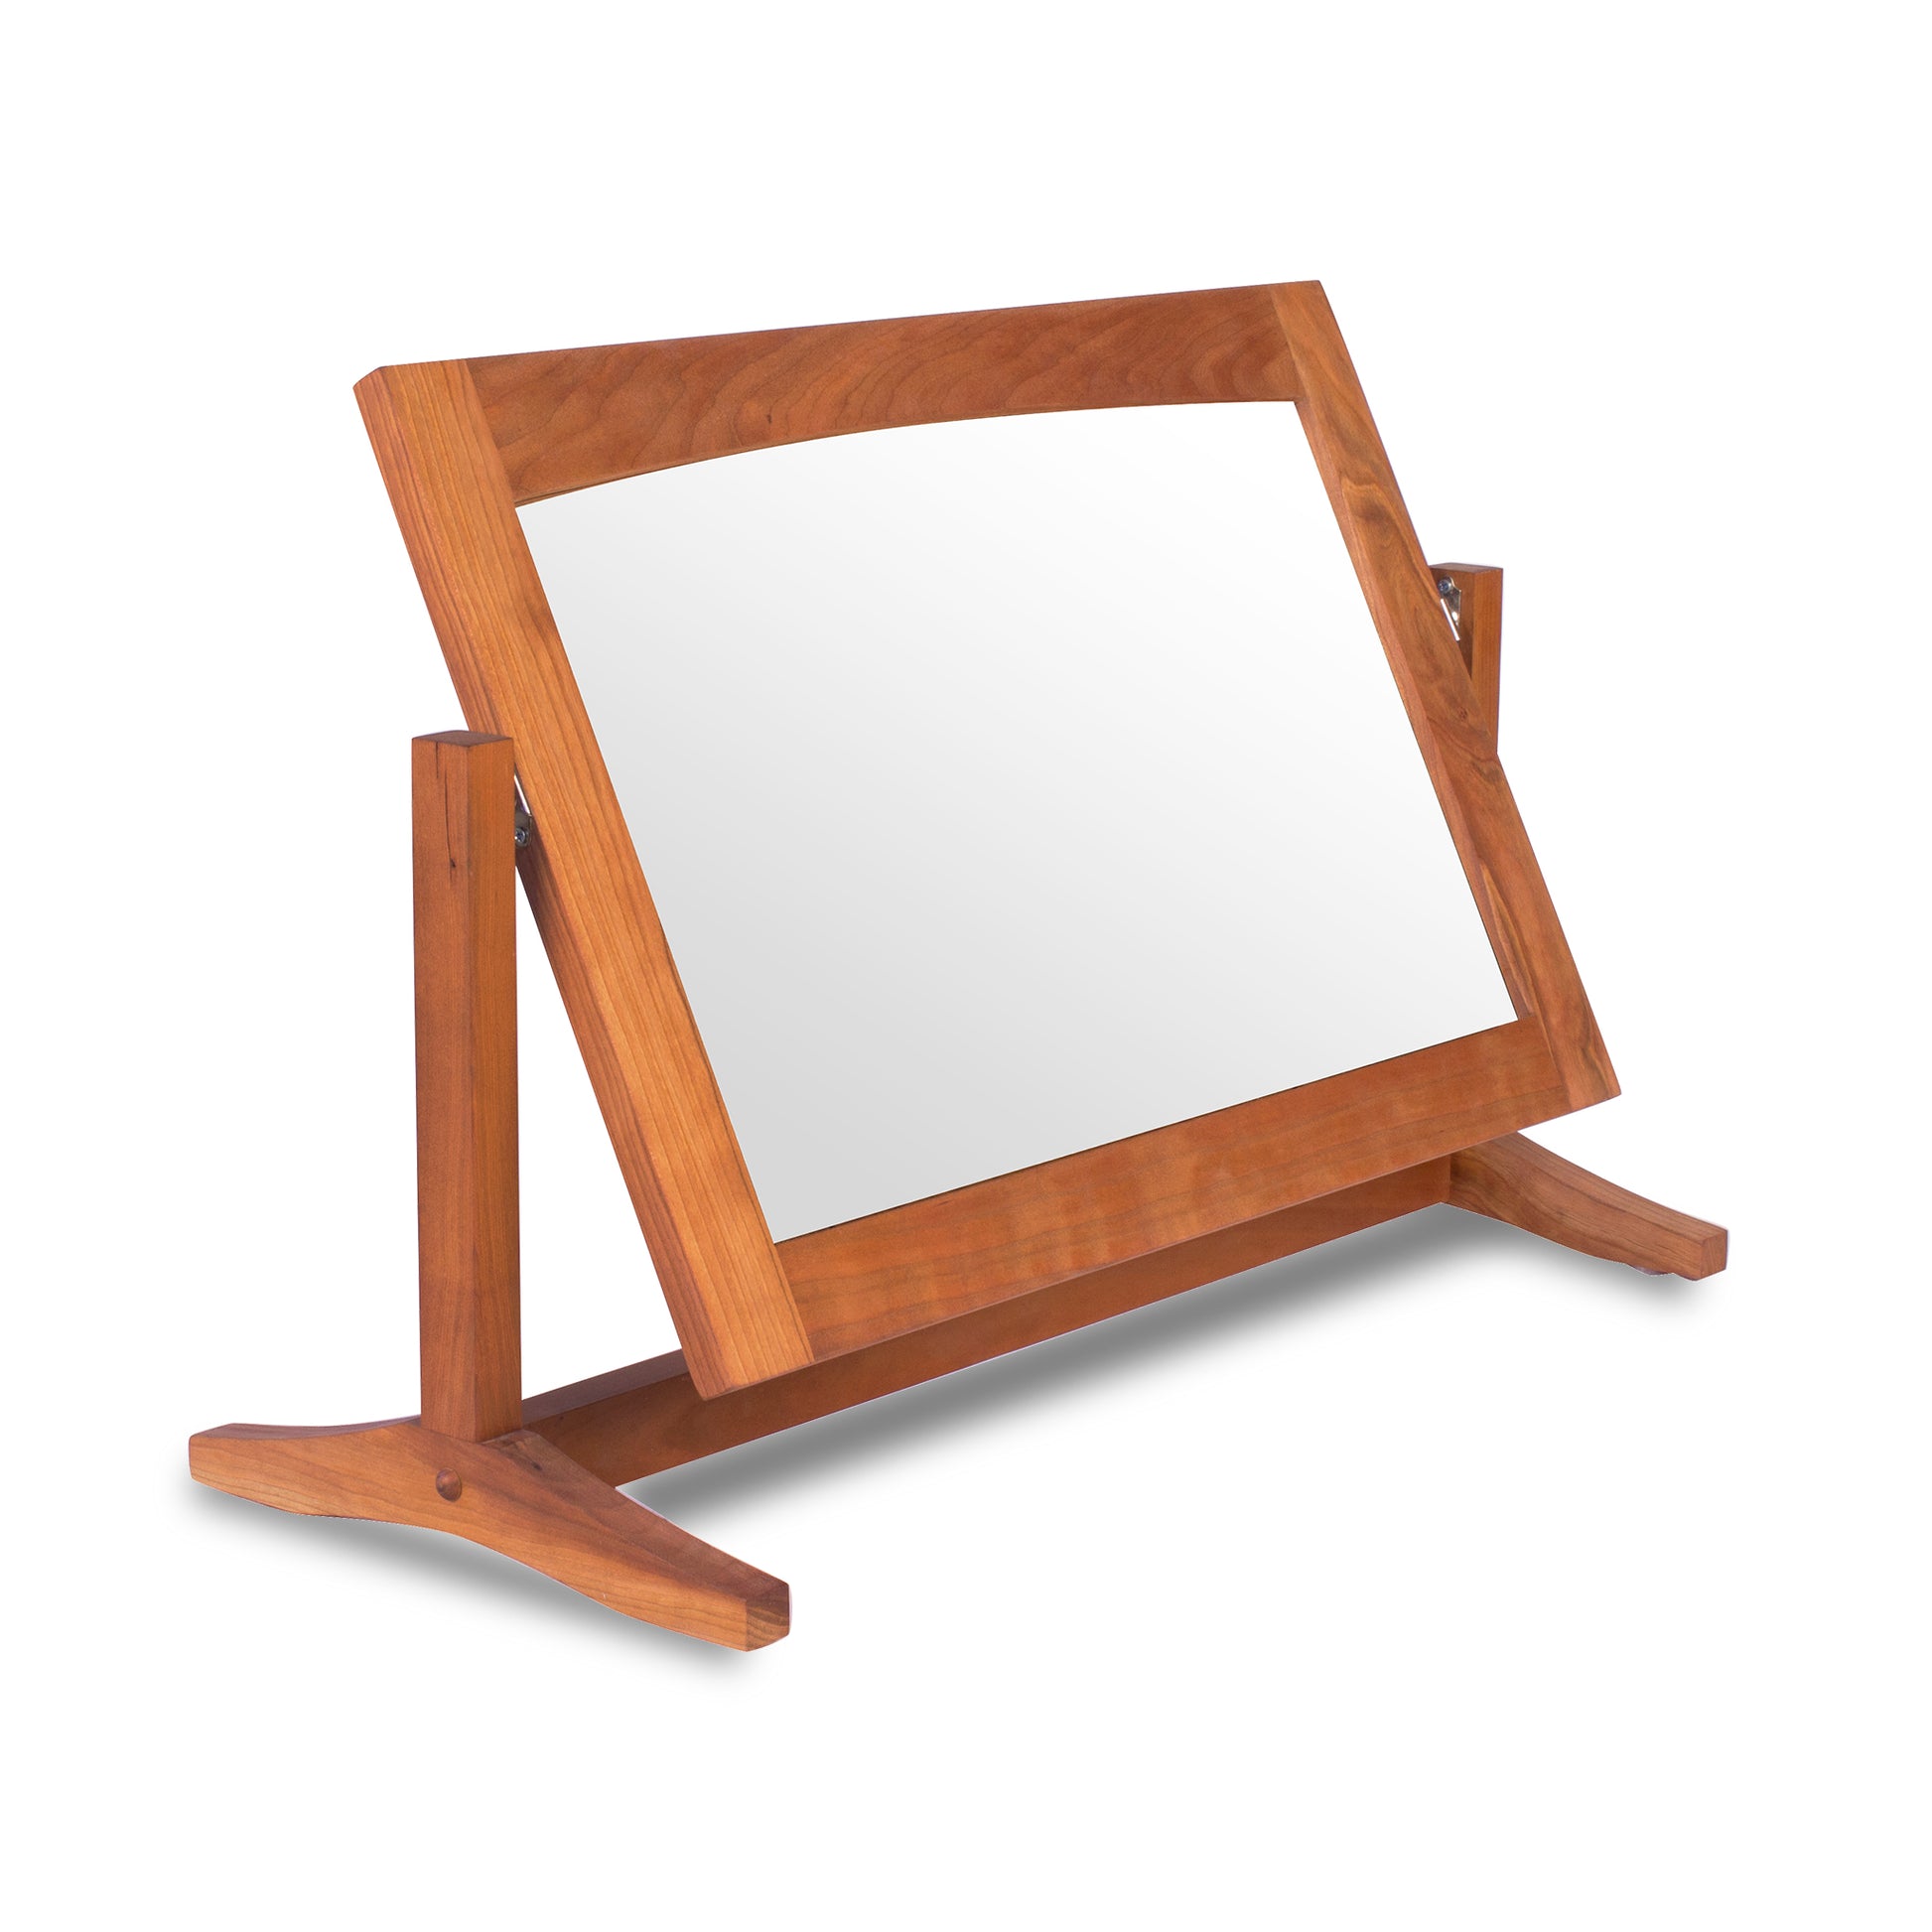 An adjustable wooden stand with a handcrafted New England Shaker Adjustable Dresser Mirror, sustainably harvested from Vermont's solid woods, by Lyndon Furniture.